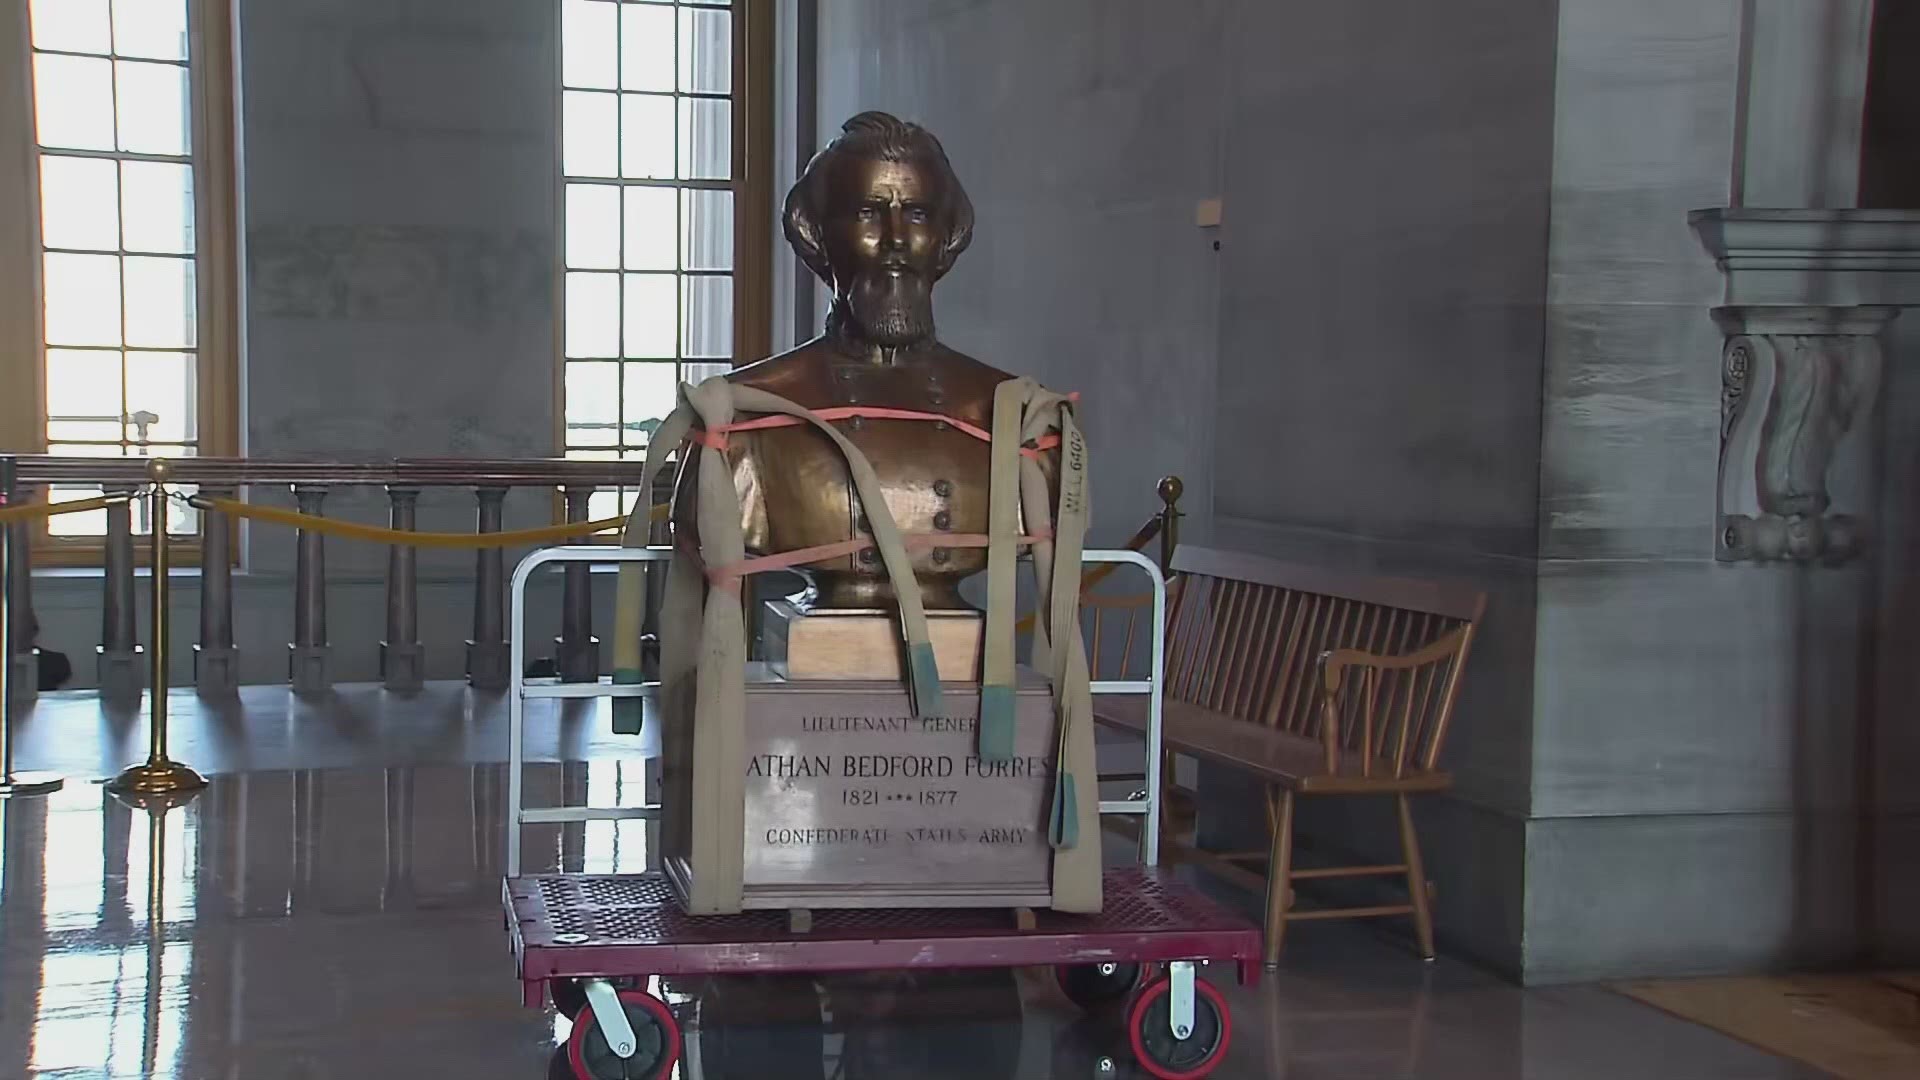 Crews are relocating three busts, including Nathan Bedford Forest, from the state capitol to the Tennessee State Museum on Friday morning.